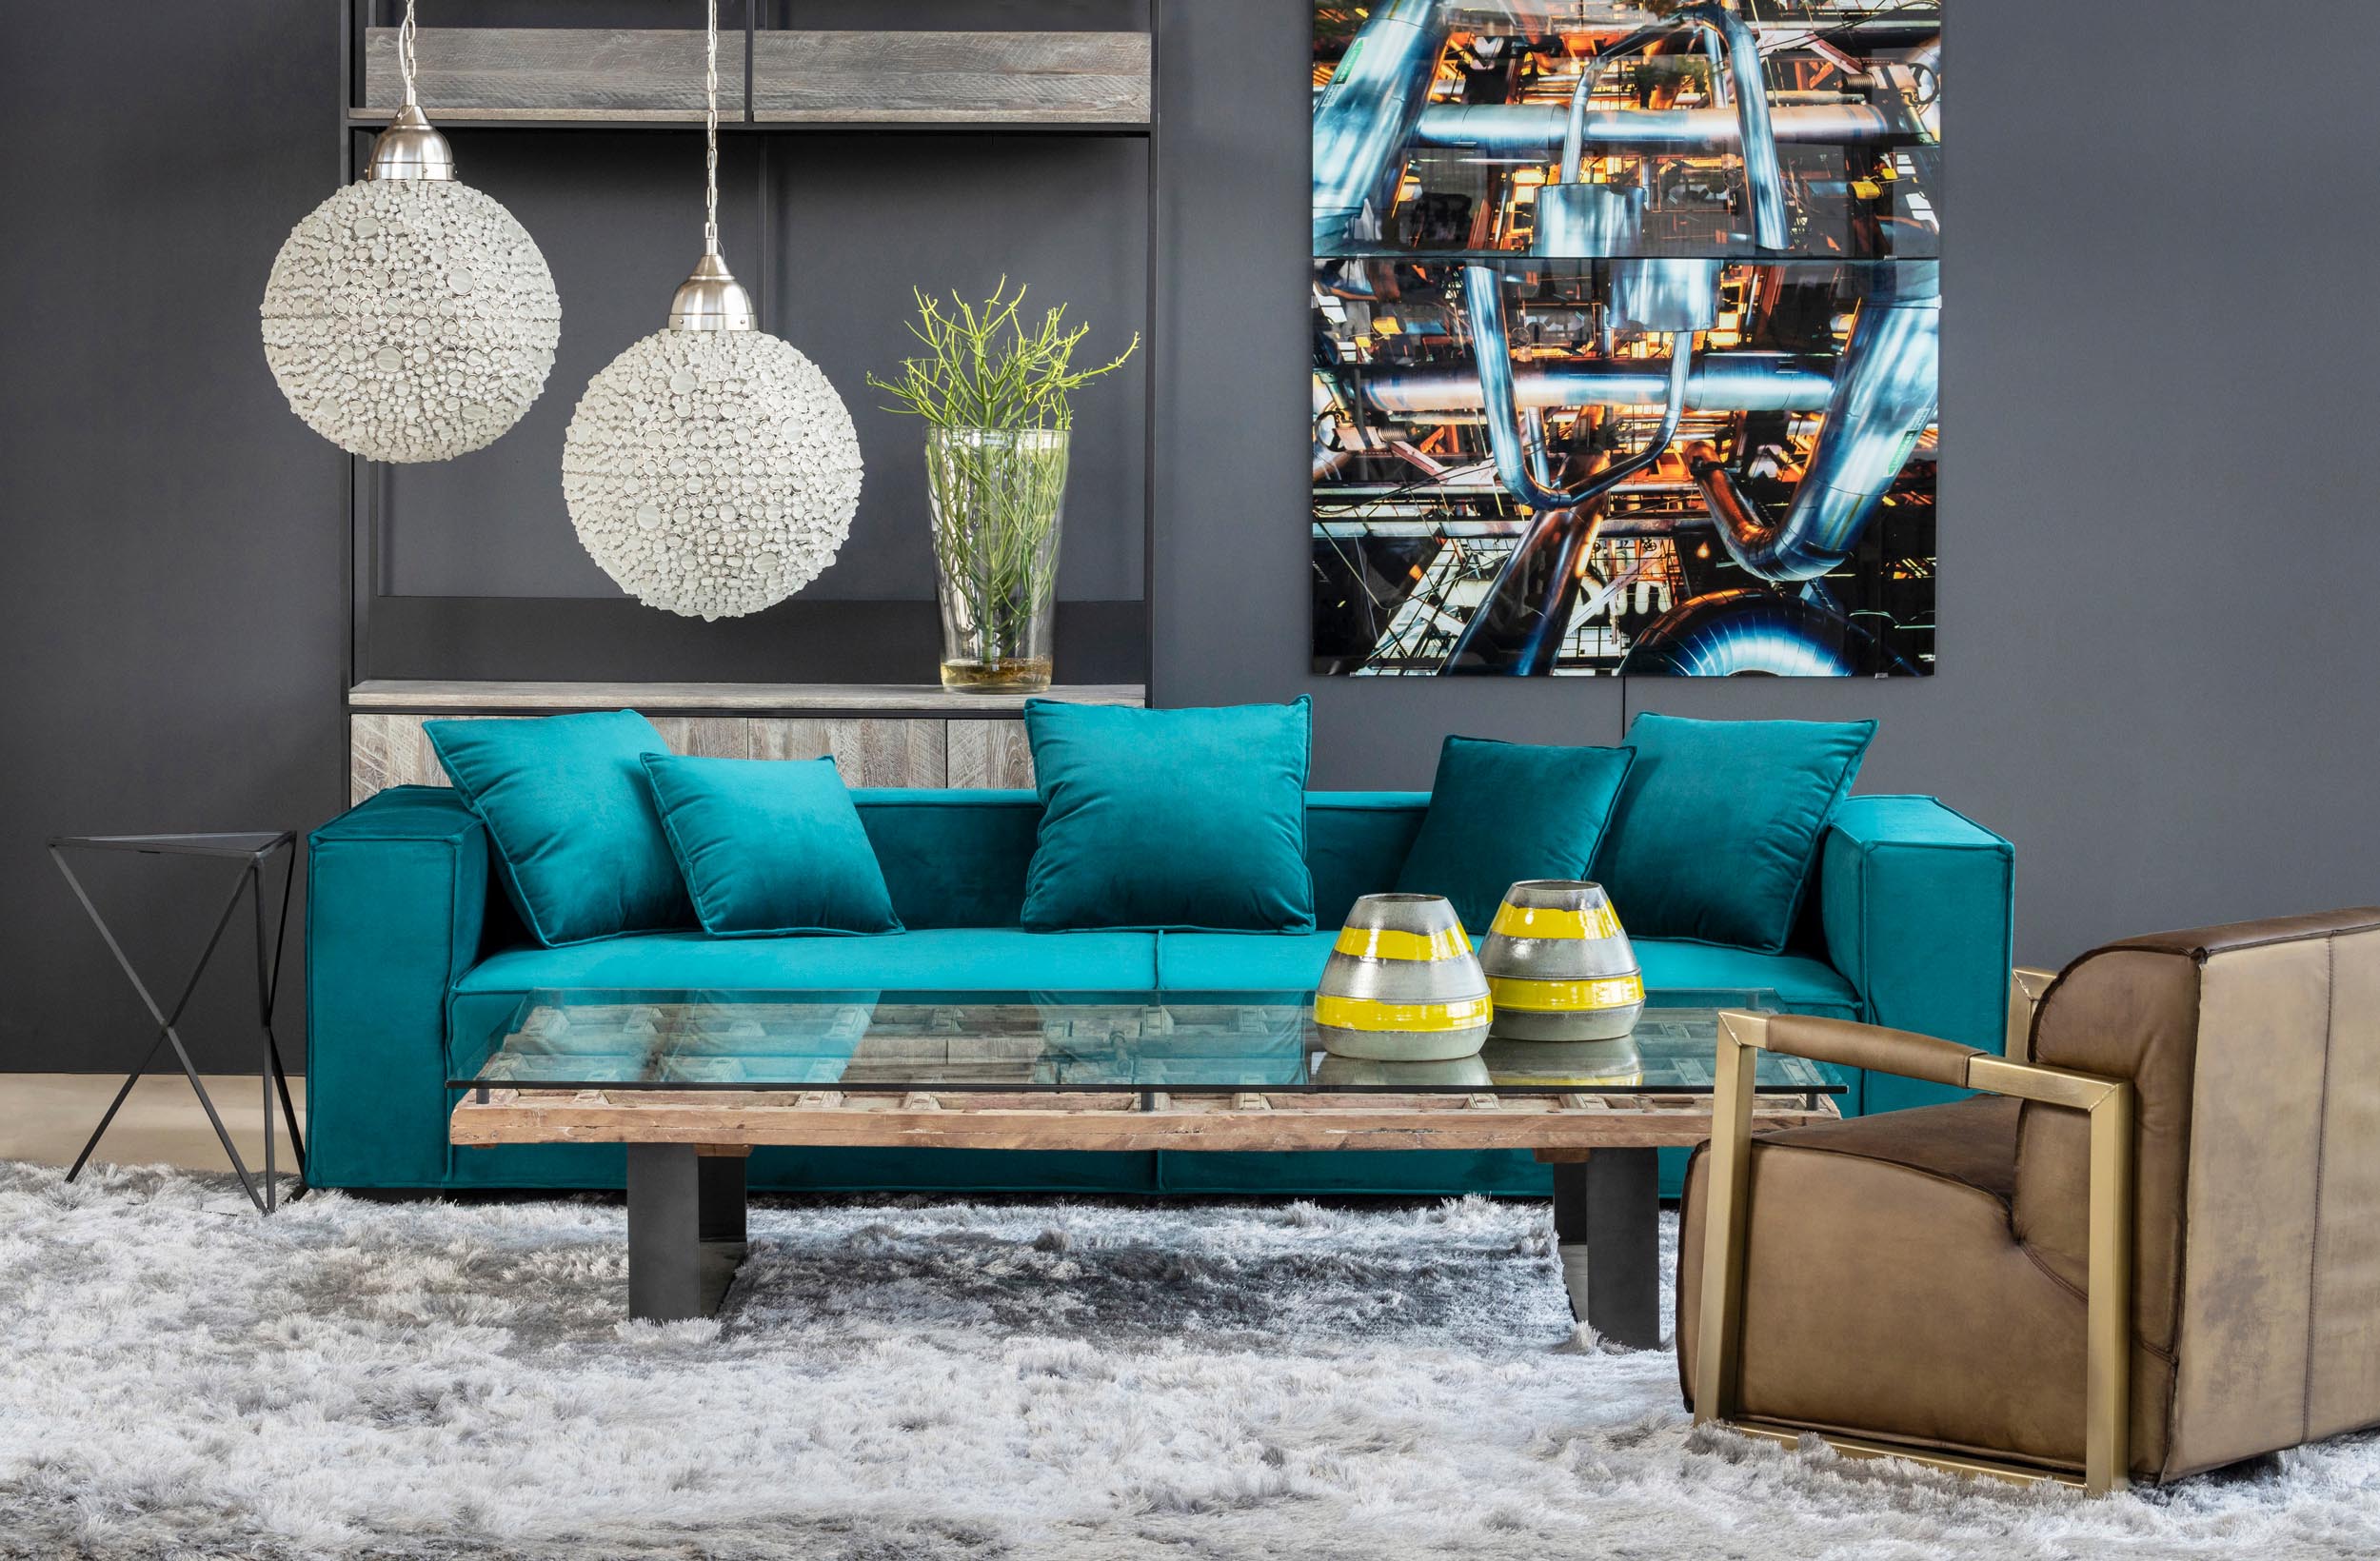 Johannesburg Furniture Stores South Africa : South Africa Johannesburg